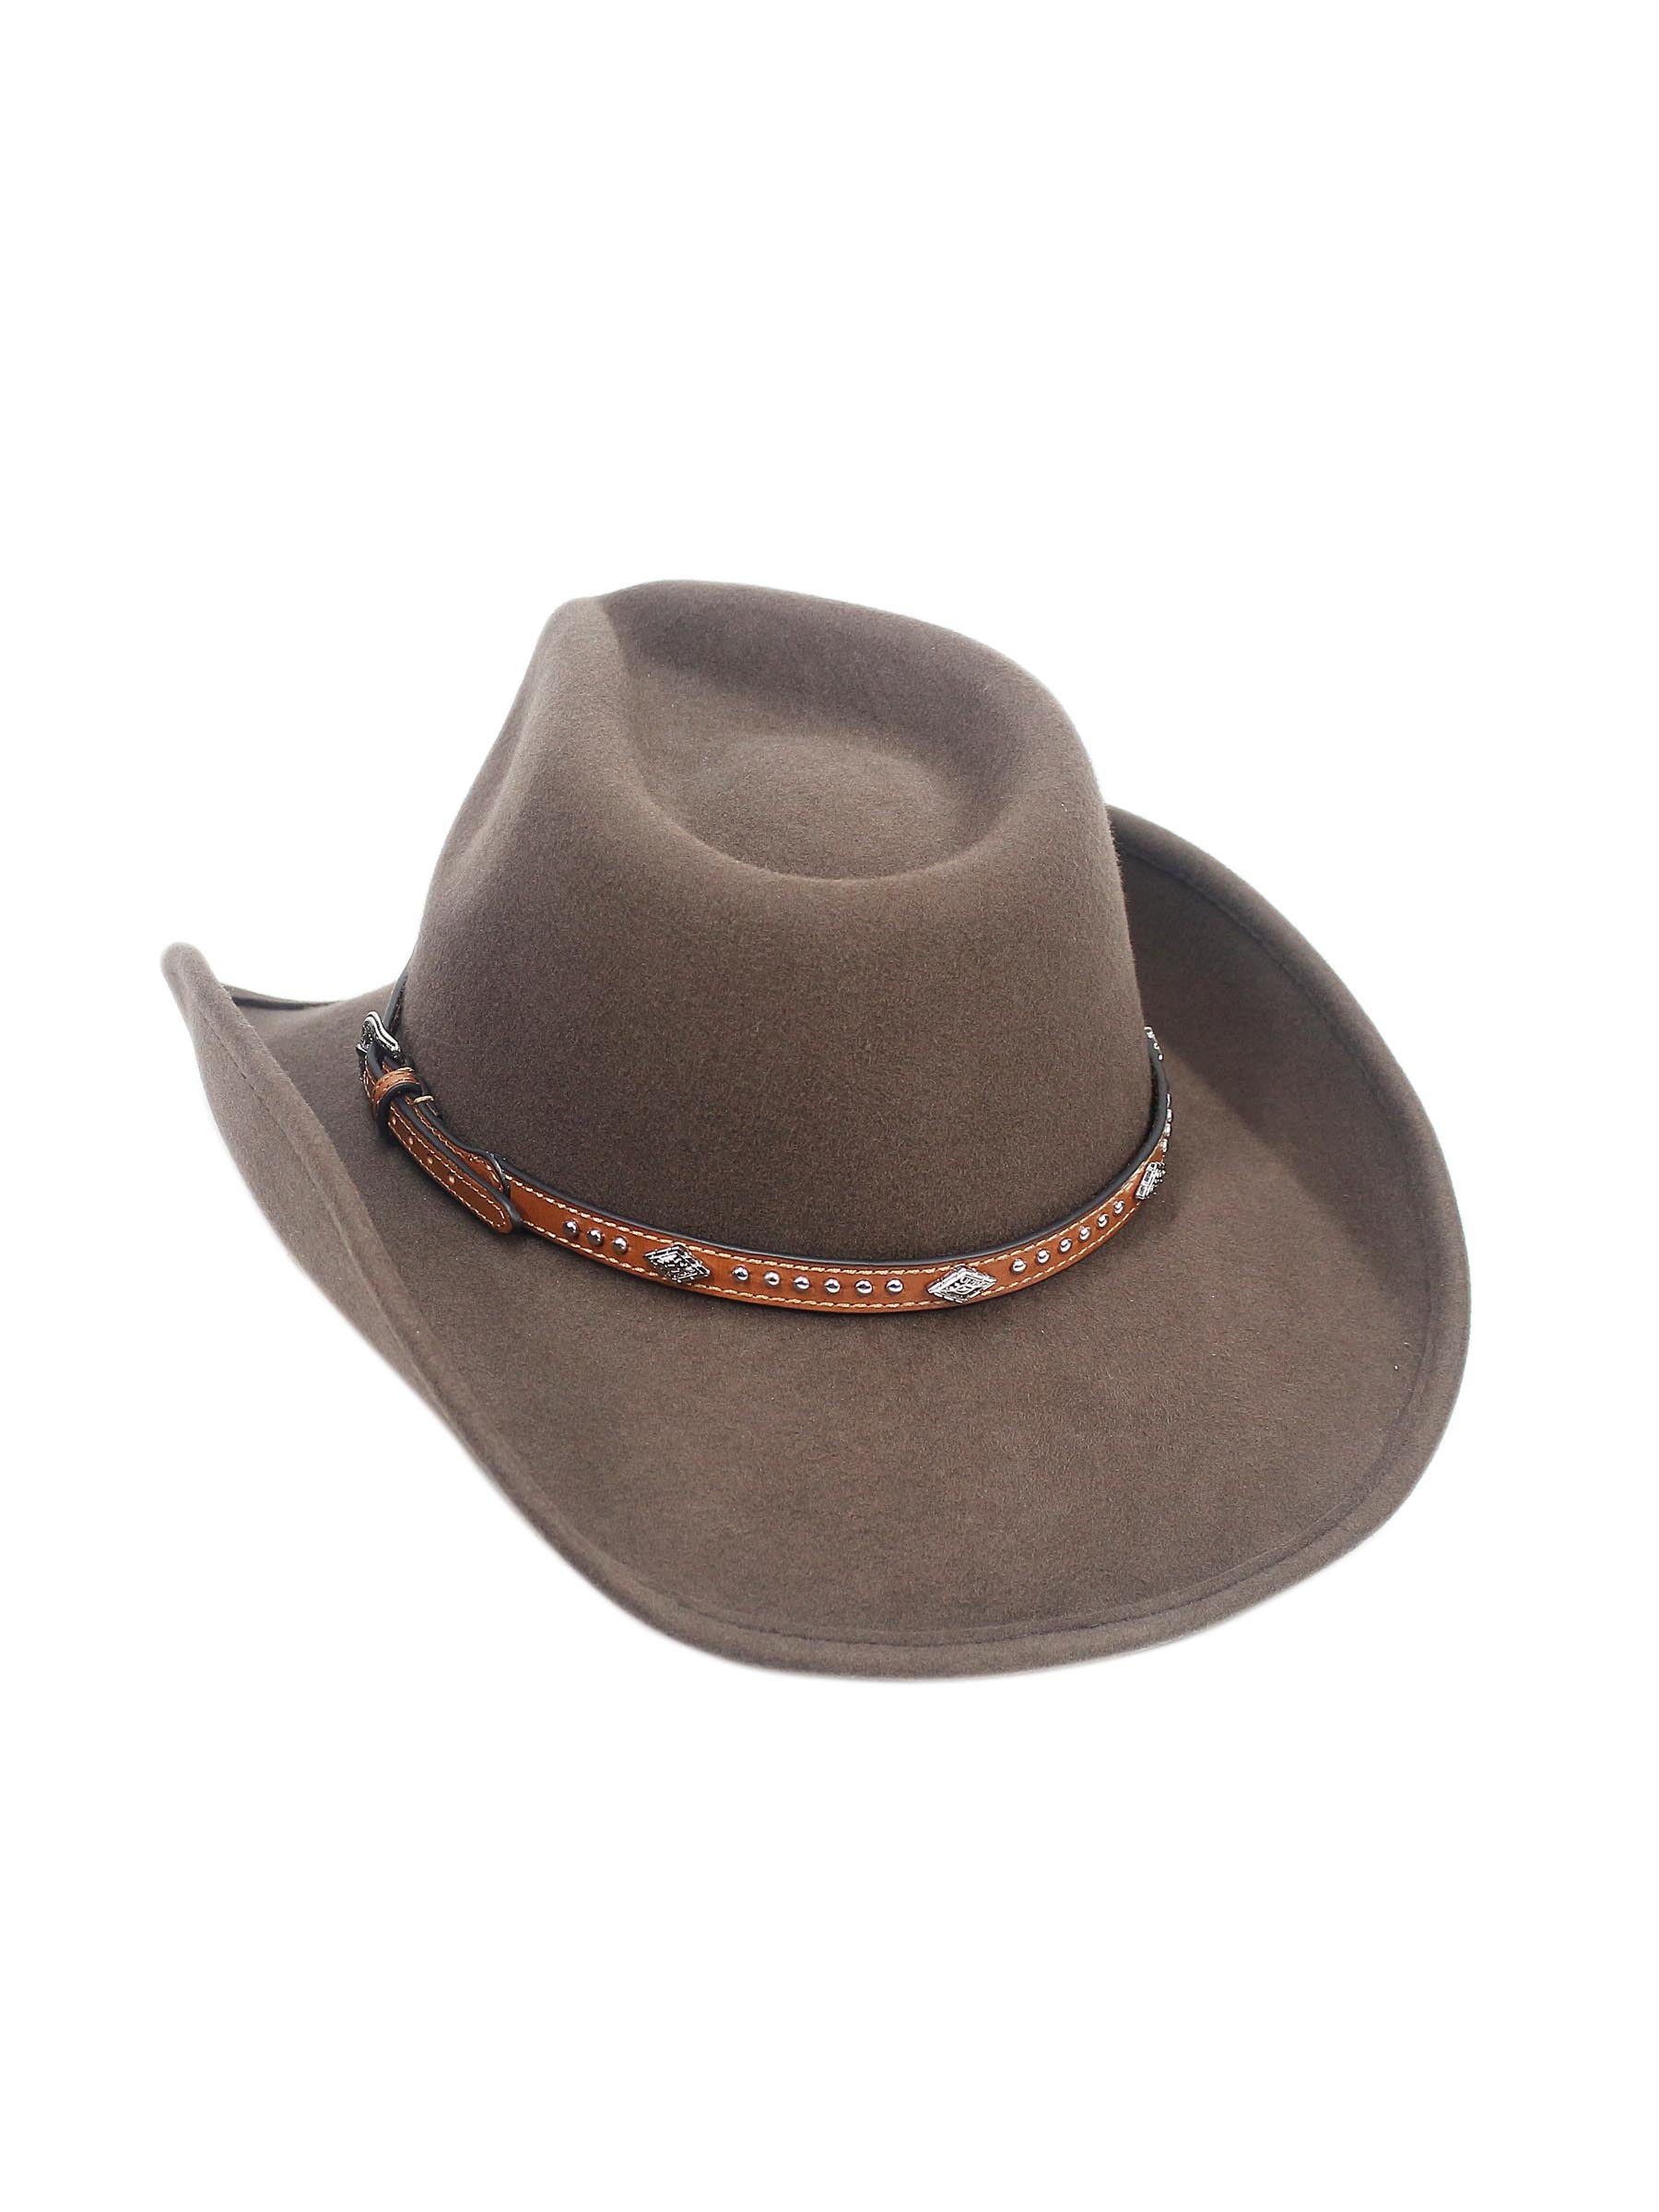 MF Western Hat Band with Conchos and Bone Beading, Brown